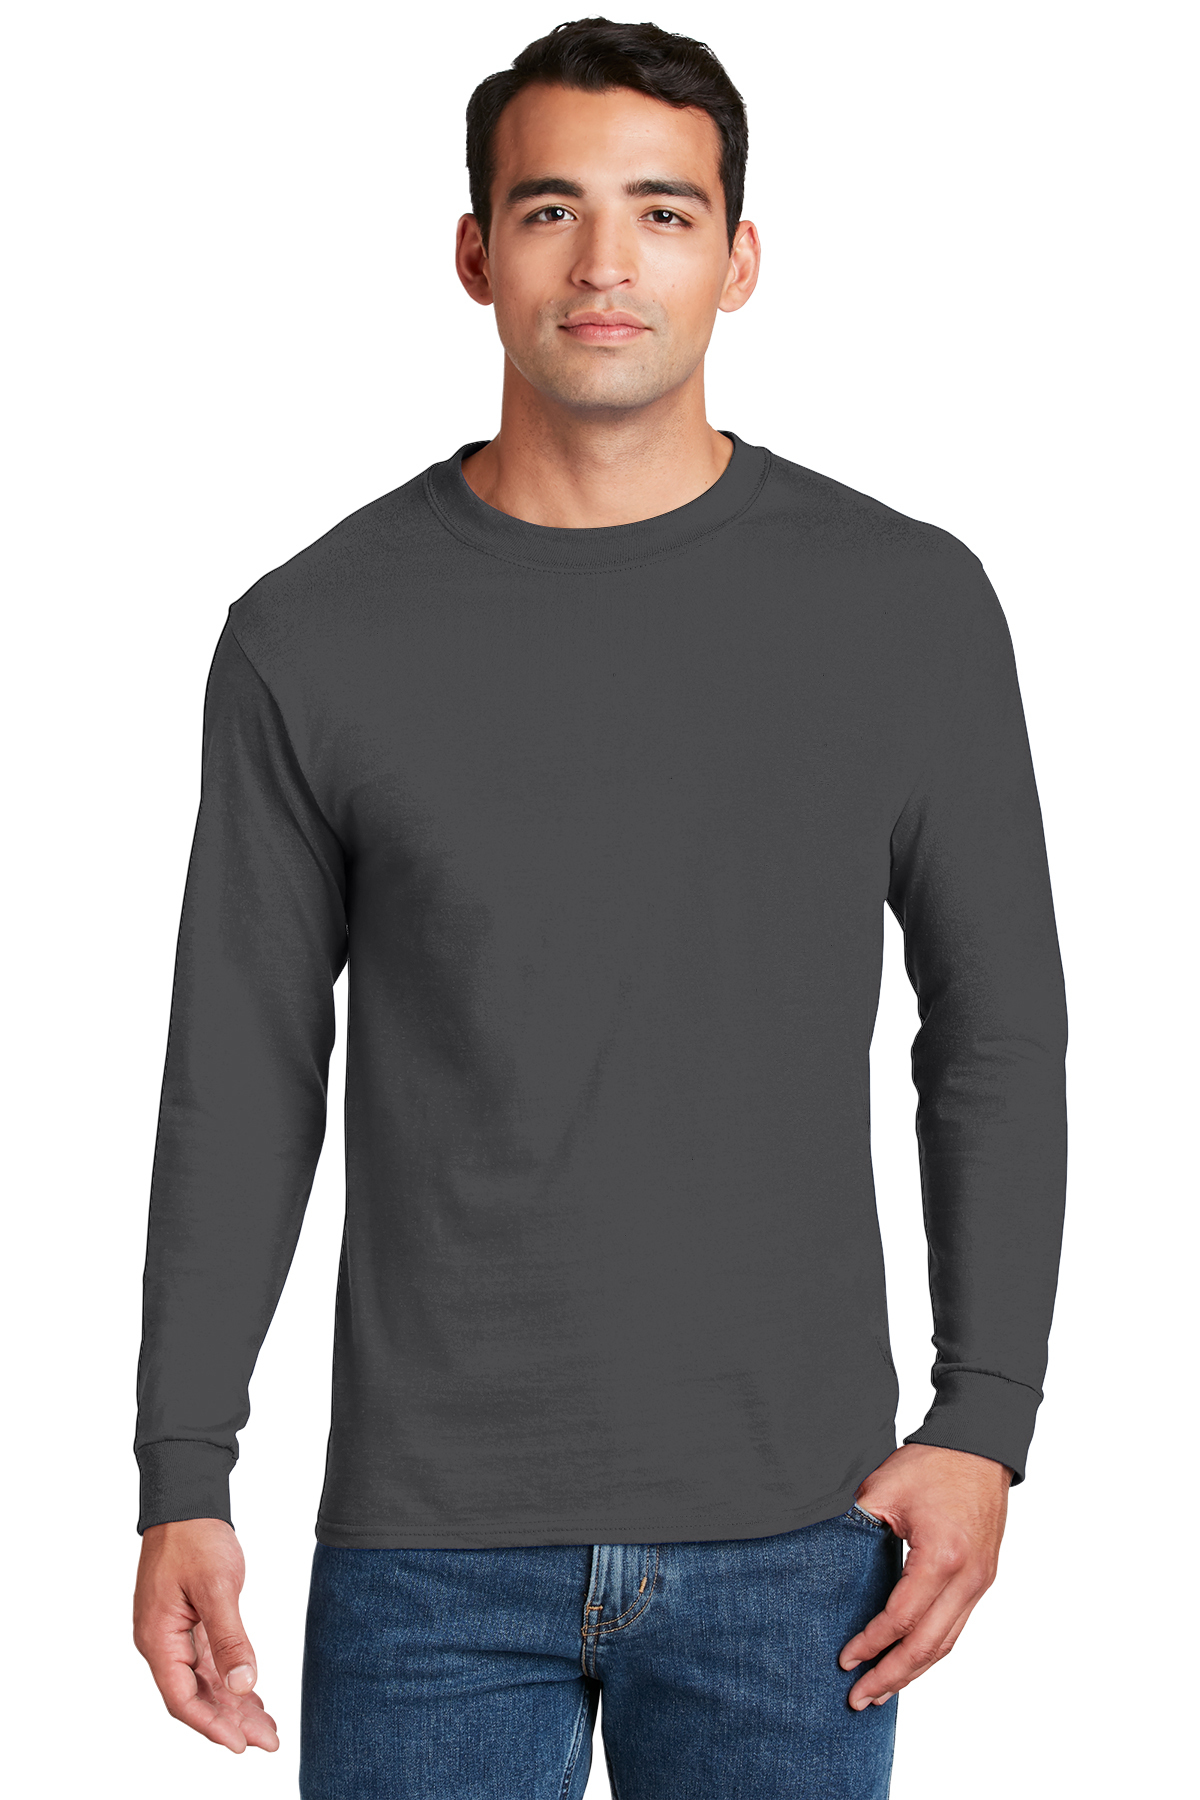 Hanes Beefy-T - 100% Cotton Long Sleeve T-Shirt | Product | Company Casuals